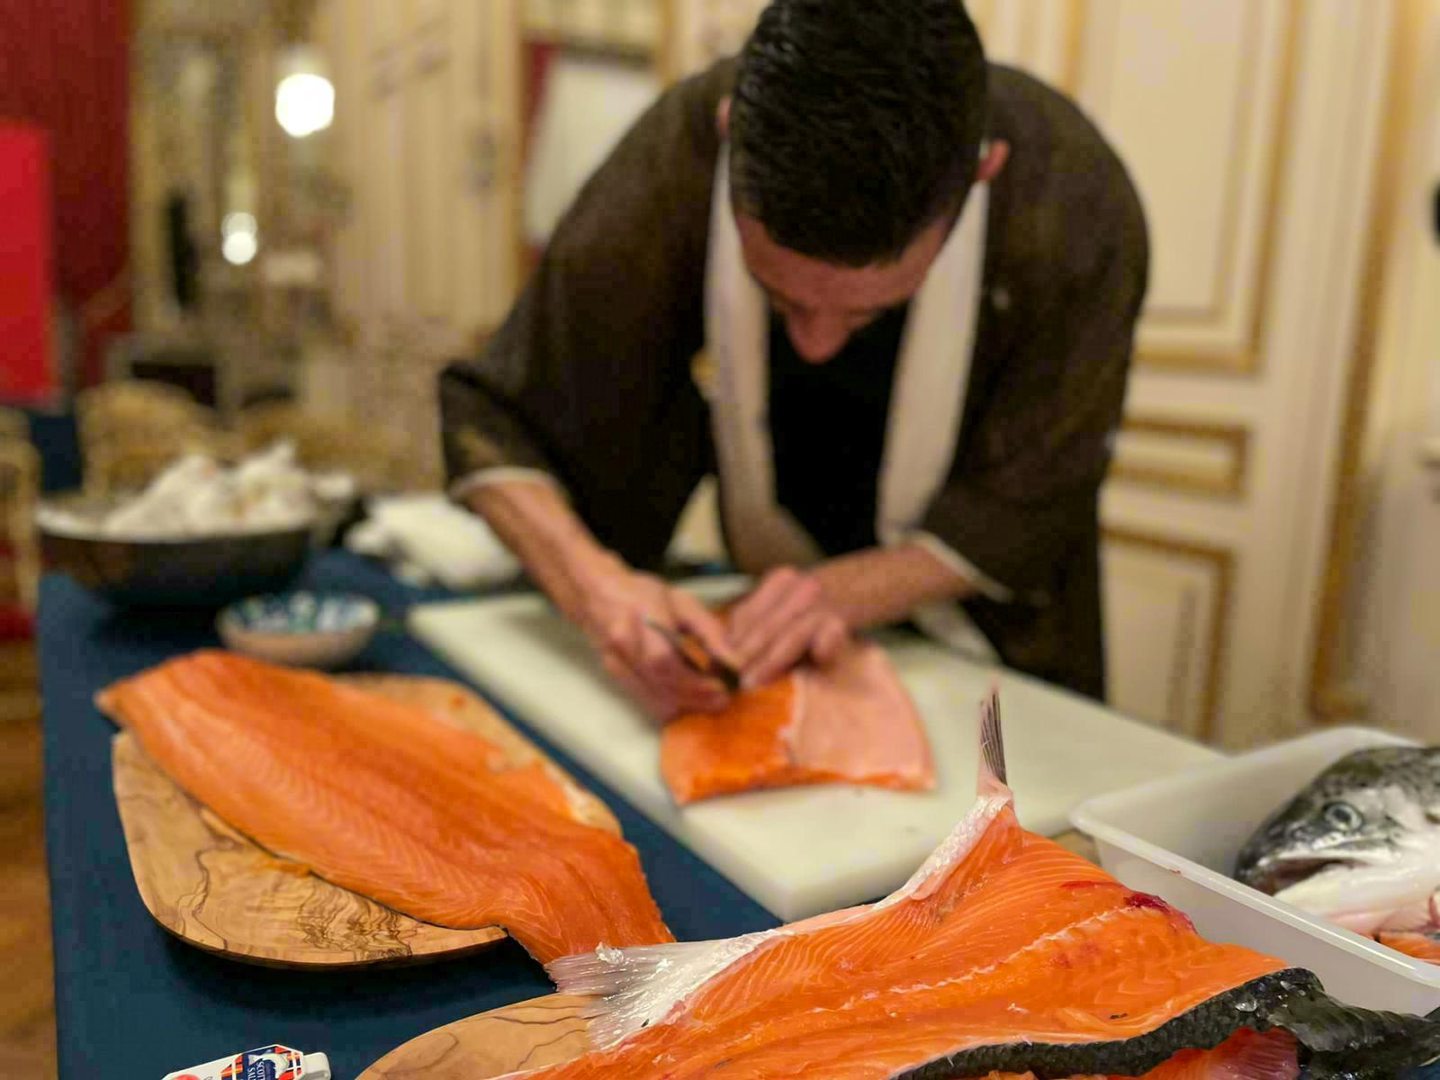 Chef Hirose Abe with salmon